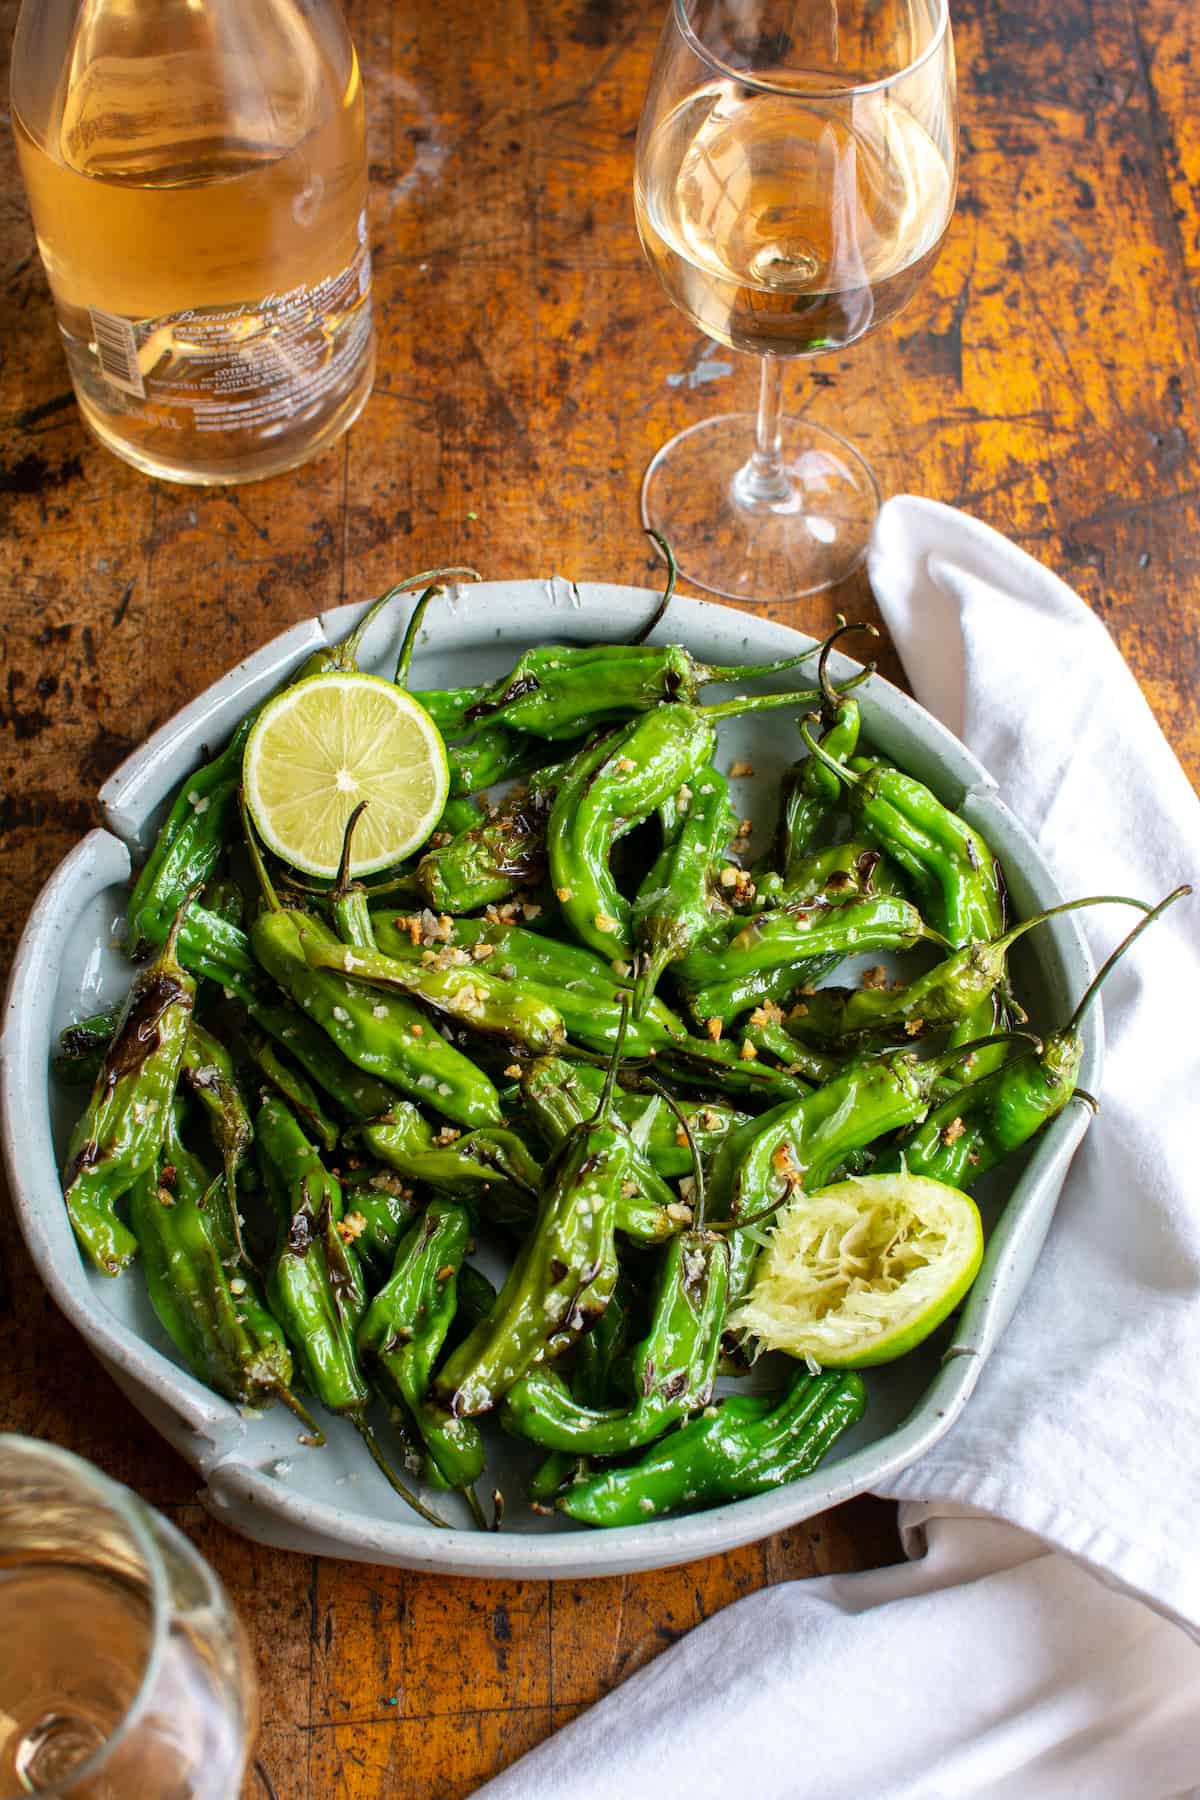 A large platter of shishito peppers with a lime cut in half on the platter next to a glass and bottle of wine.